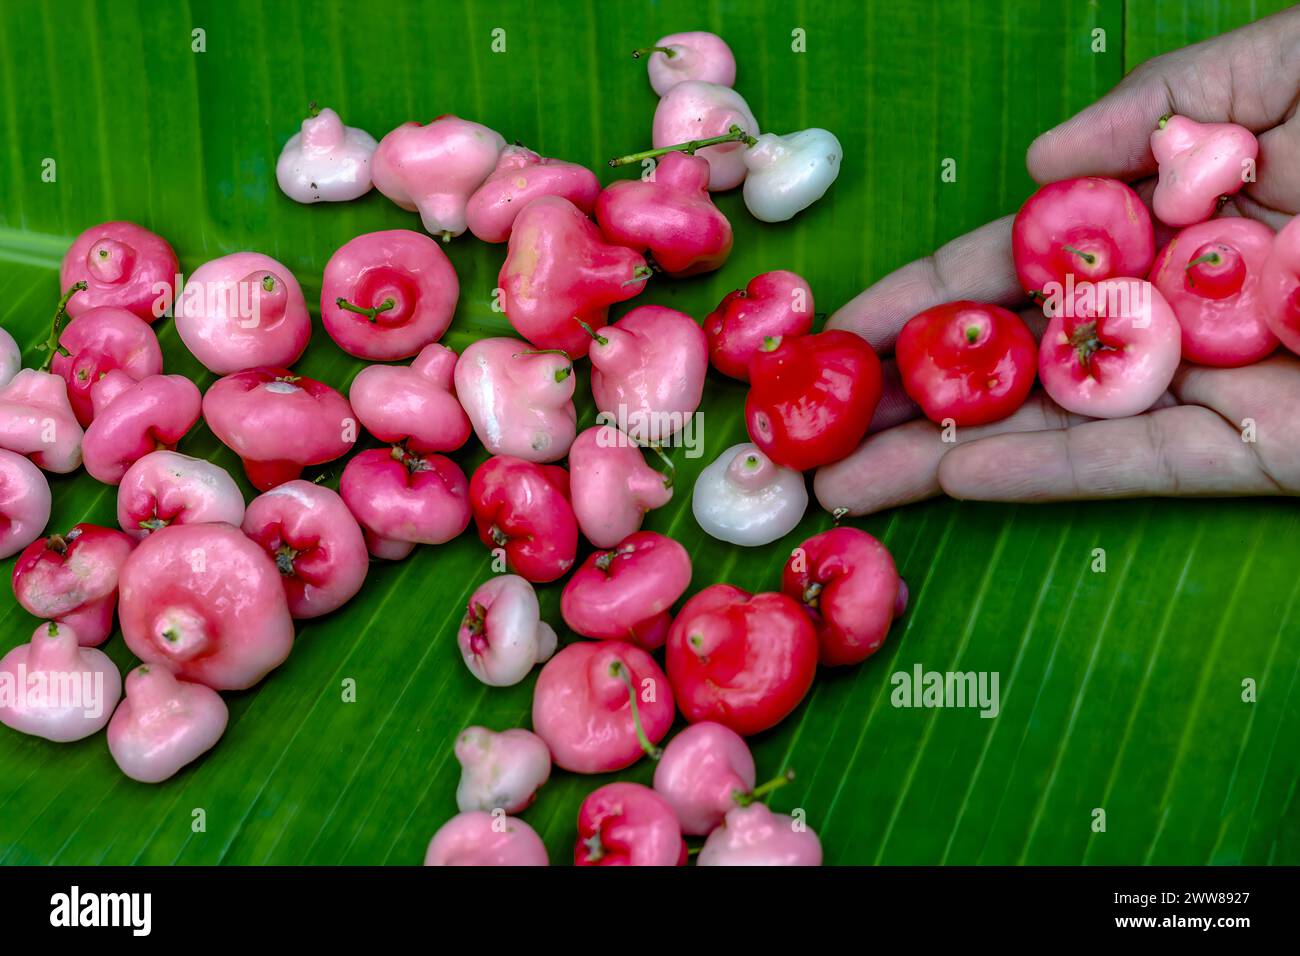 Red rose apple in green background. Stock Photo